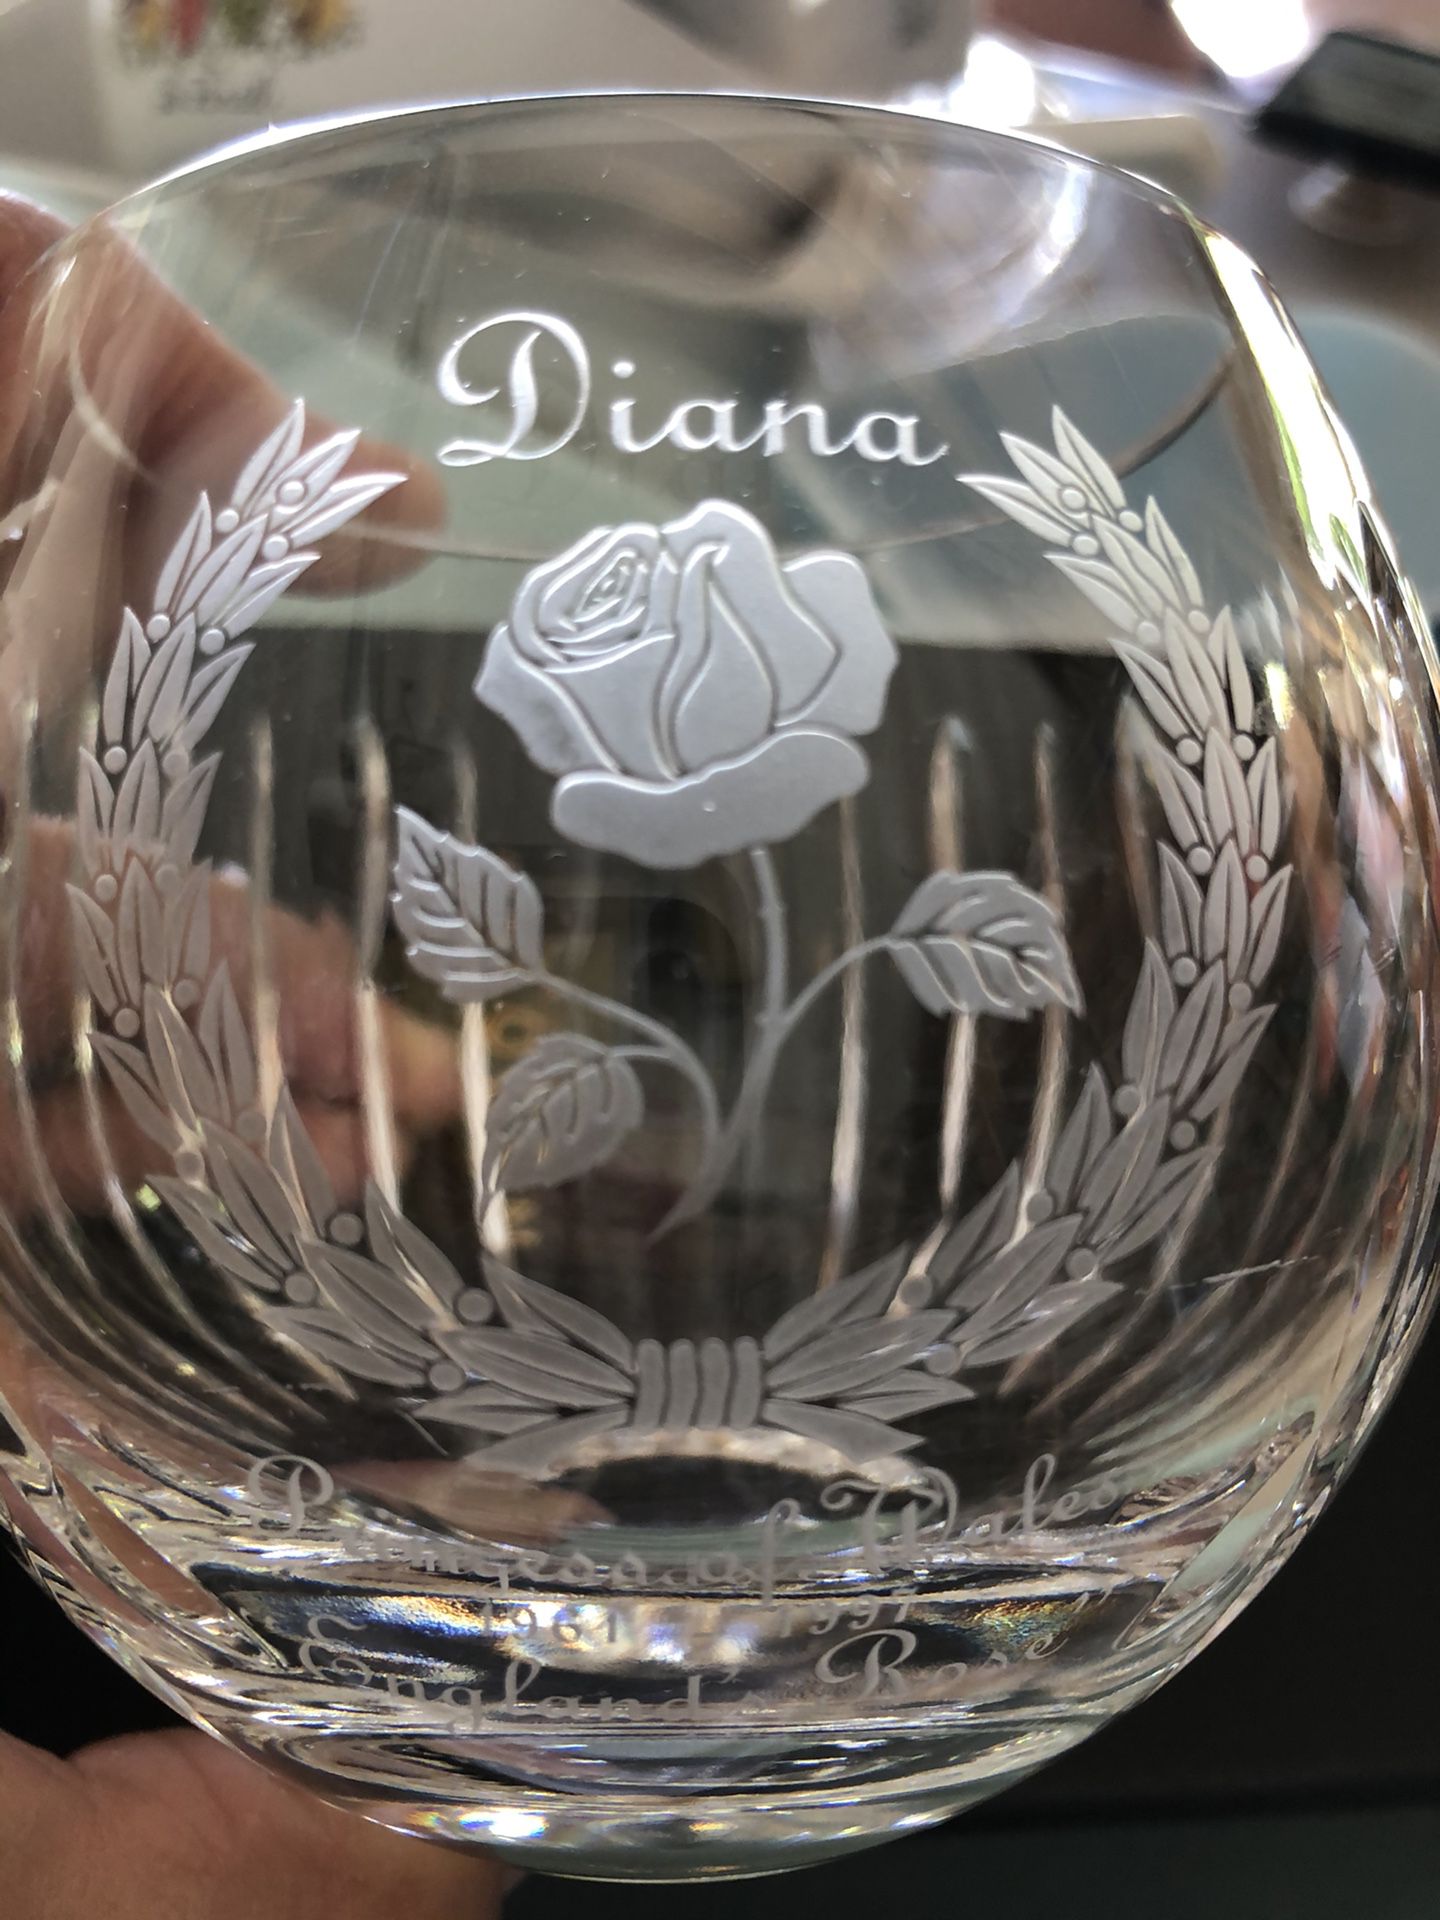 Collectable - Diana England’s Rose Stuart and Waterford 32% Lead Crystal Votive Candle Holder